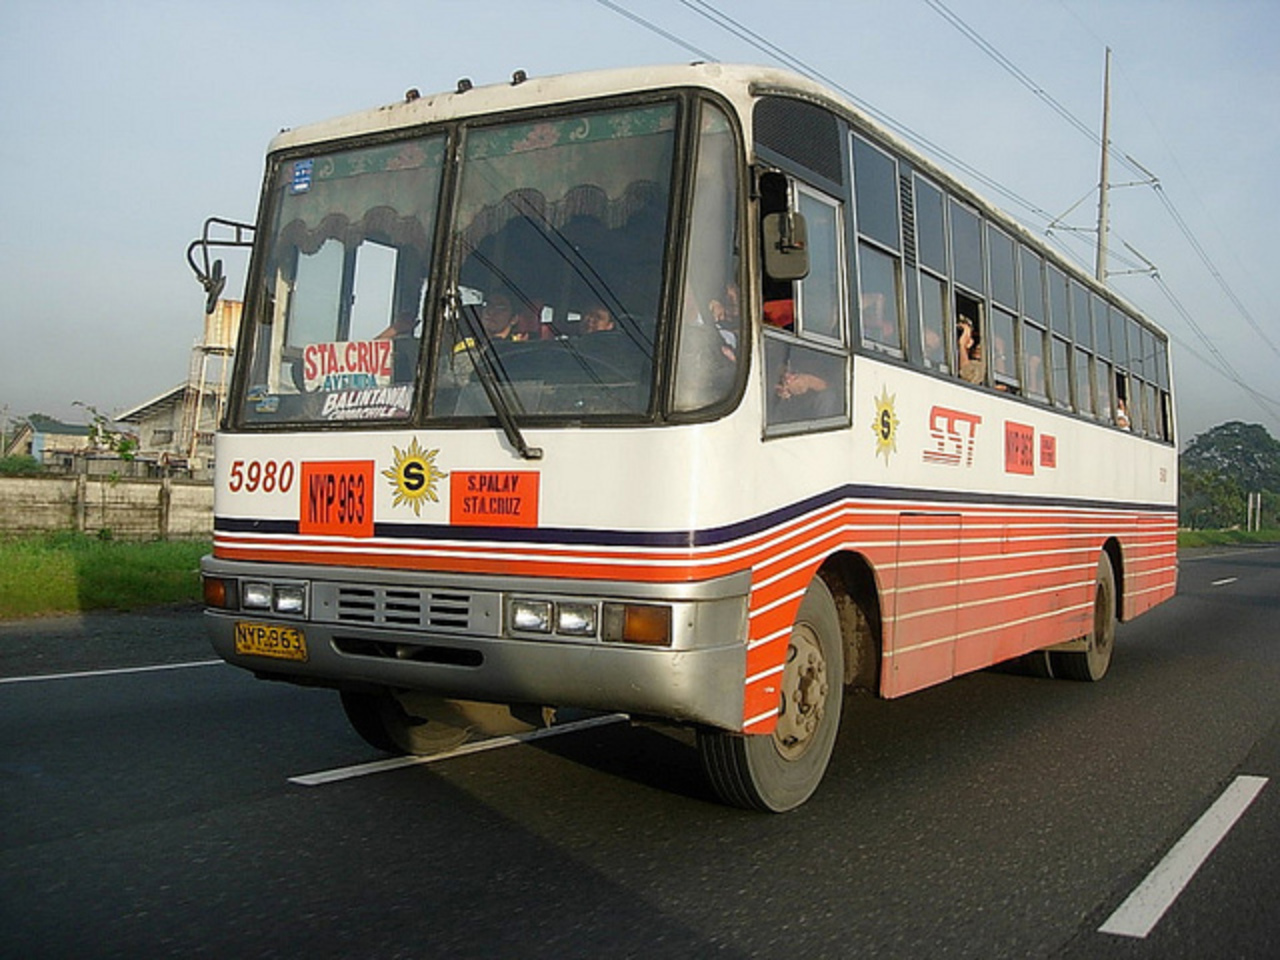 Nissan Diesel 1800HD Photo Gallery: Photo #09 out of 9, Image Size ...